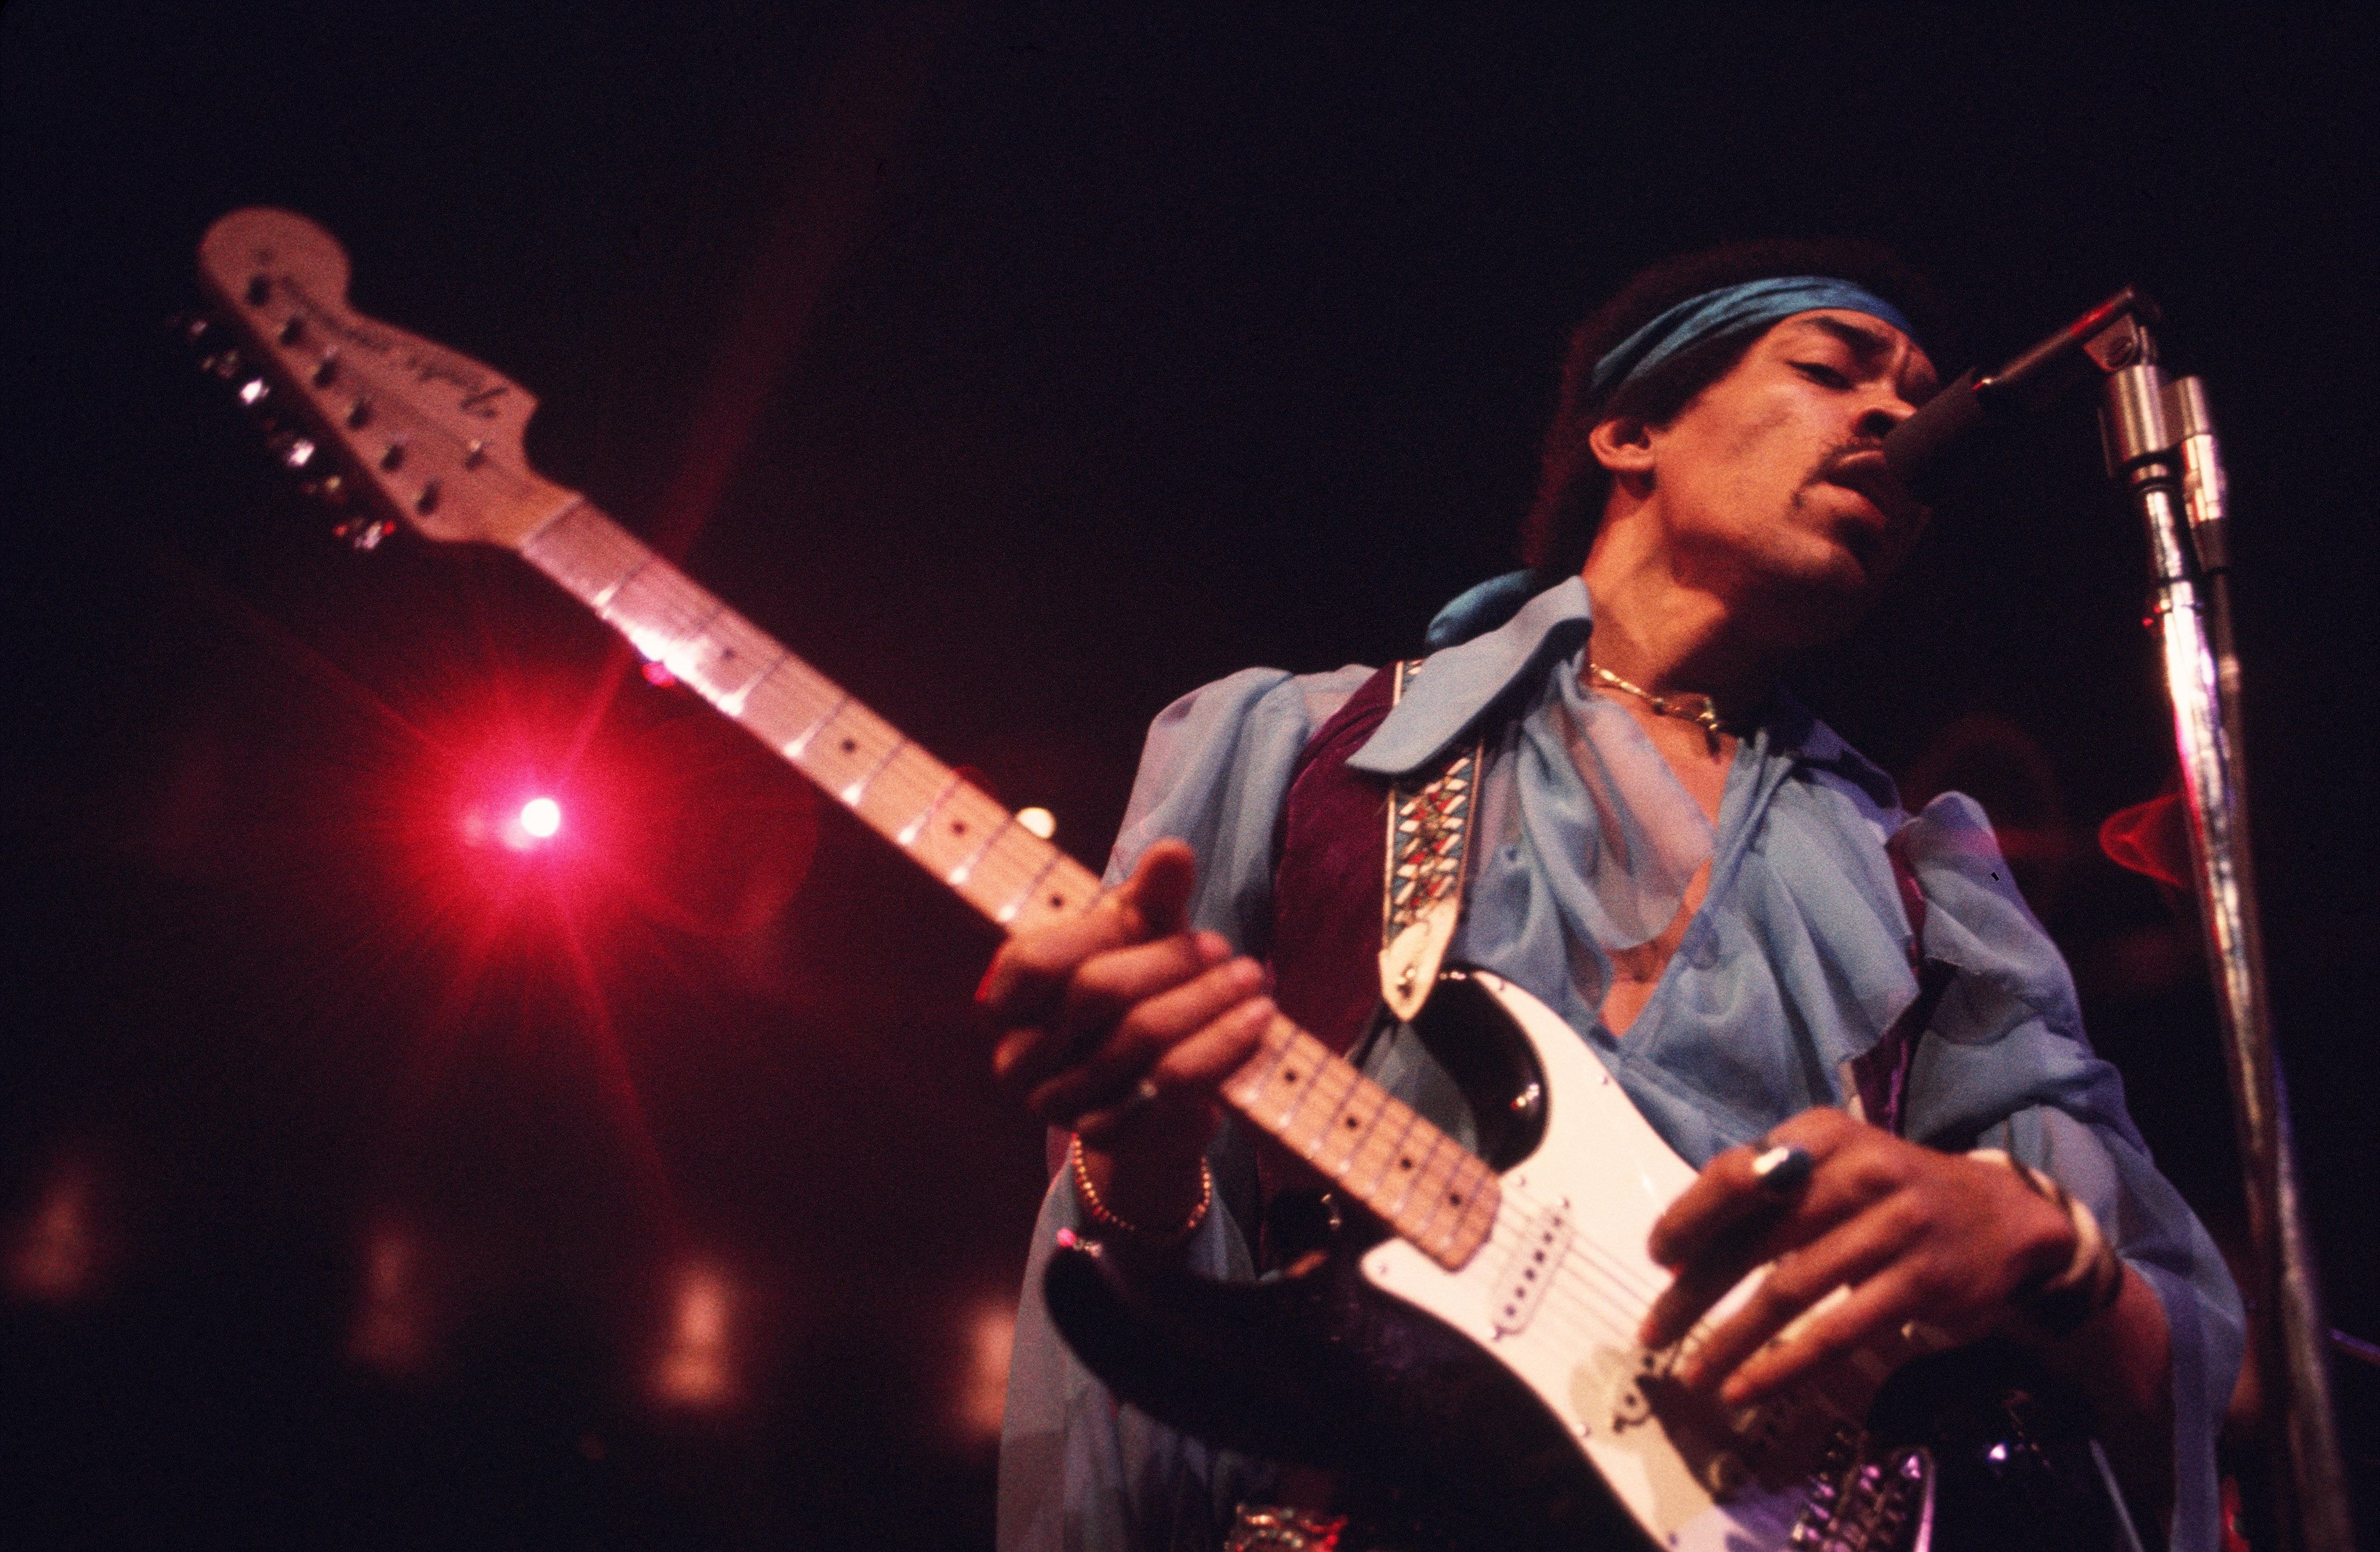 Jimi Hendrix at Madison Square Garden, New York City, 18th May 1969 | Source: Getty Images